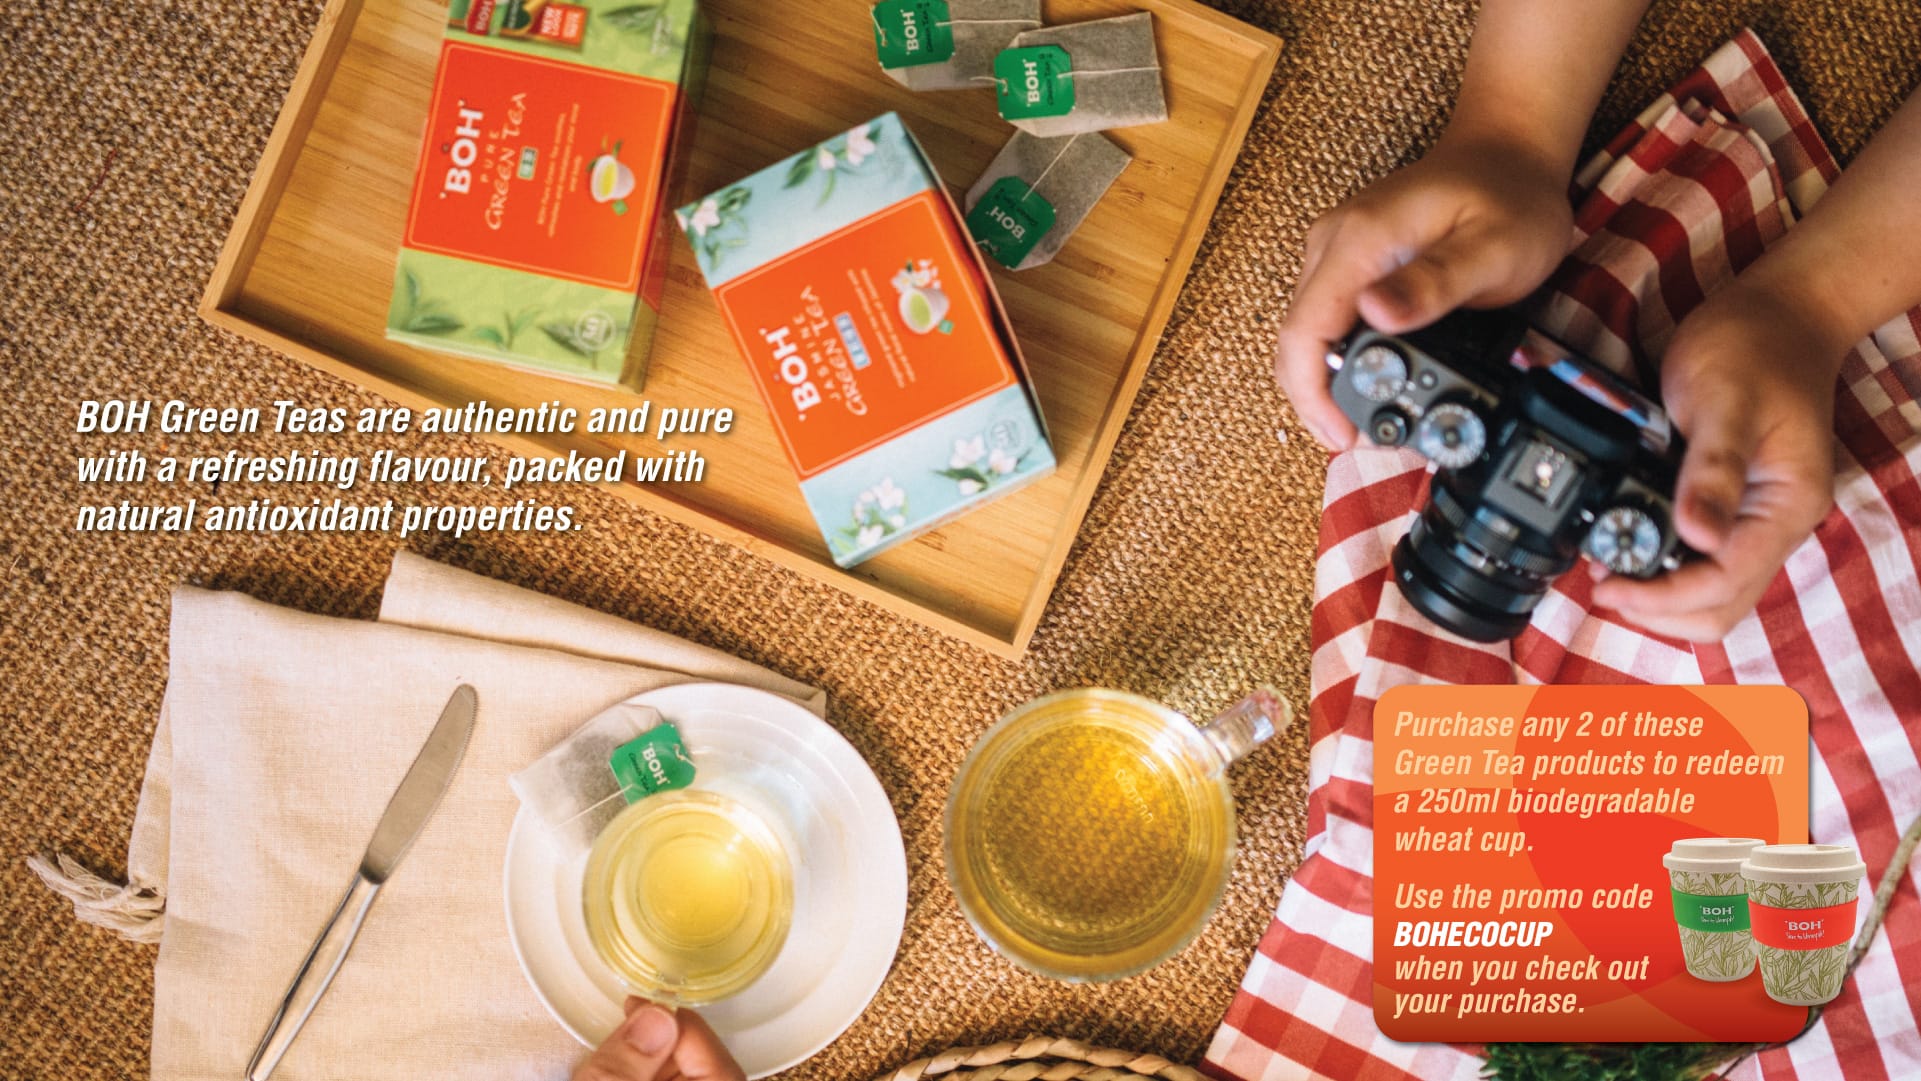 BOH Green Tea Promotion Free Beautiful Biodegradable Wheat Cup